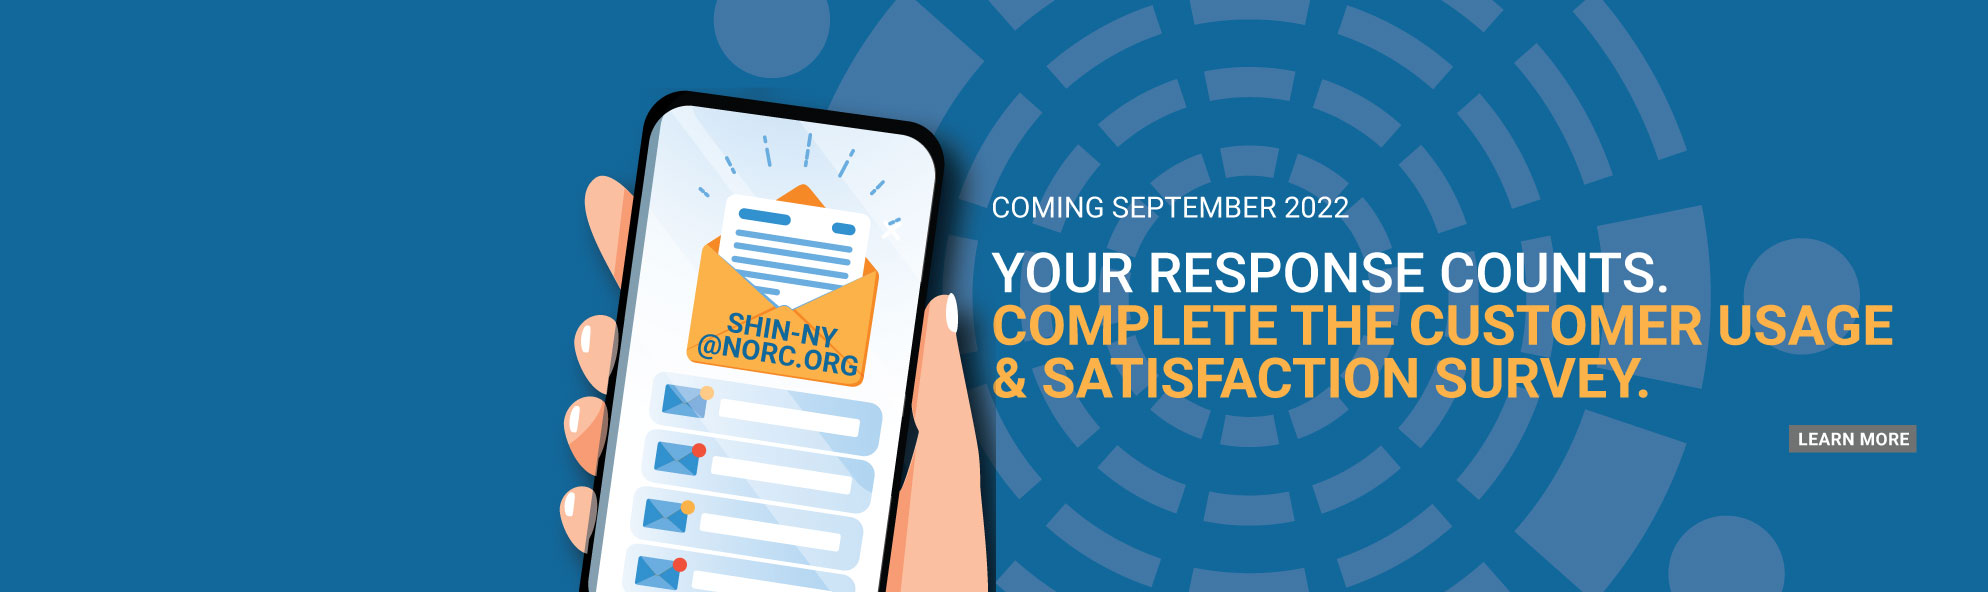 <h2>2022 NORC Survey</h2> We prioritize our improvements, enhancements and new offerings based on your feedback. <a class='link' href='https://healthix.org/norc-survey/'><i class='fa fa-play-circle' aria-hidden='true'></i>Learn More</a>